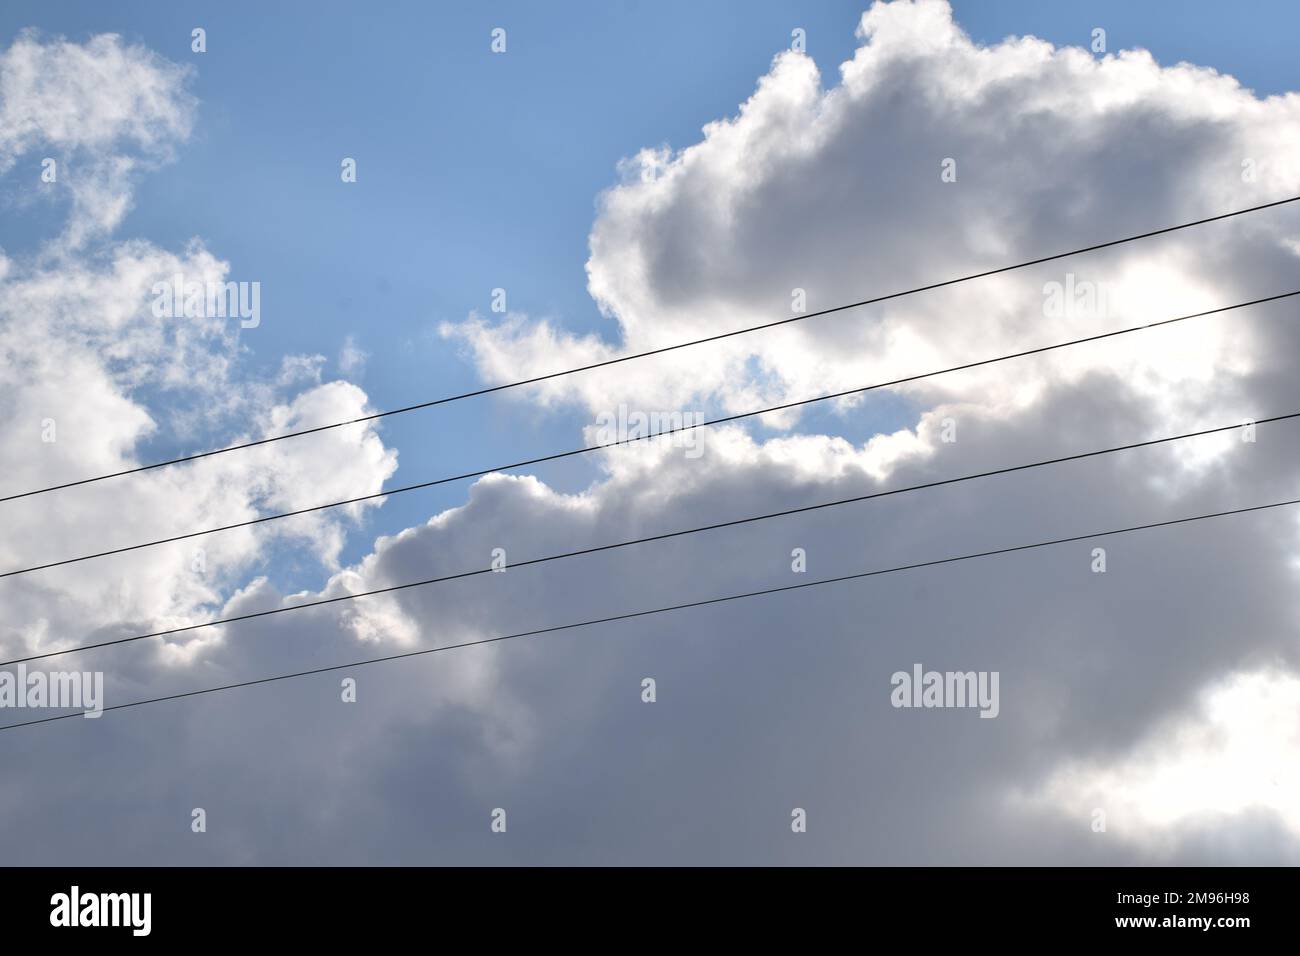 Sustainable energy concept, Sustanability, clouds in the sky with energy wires, energy concept, Renewable energy, solar power, electricity Stock Photo